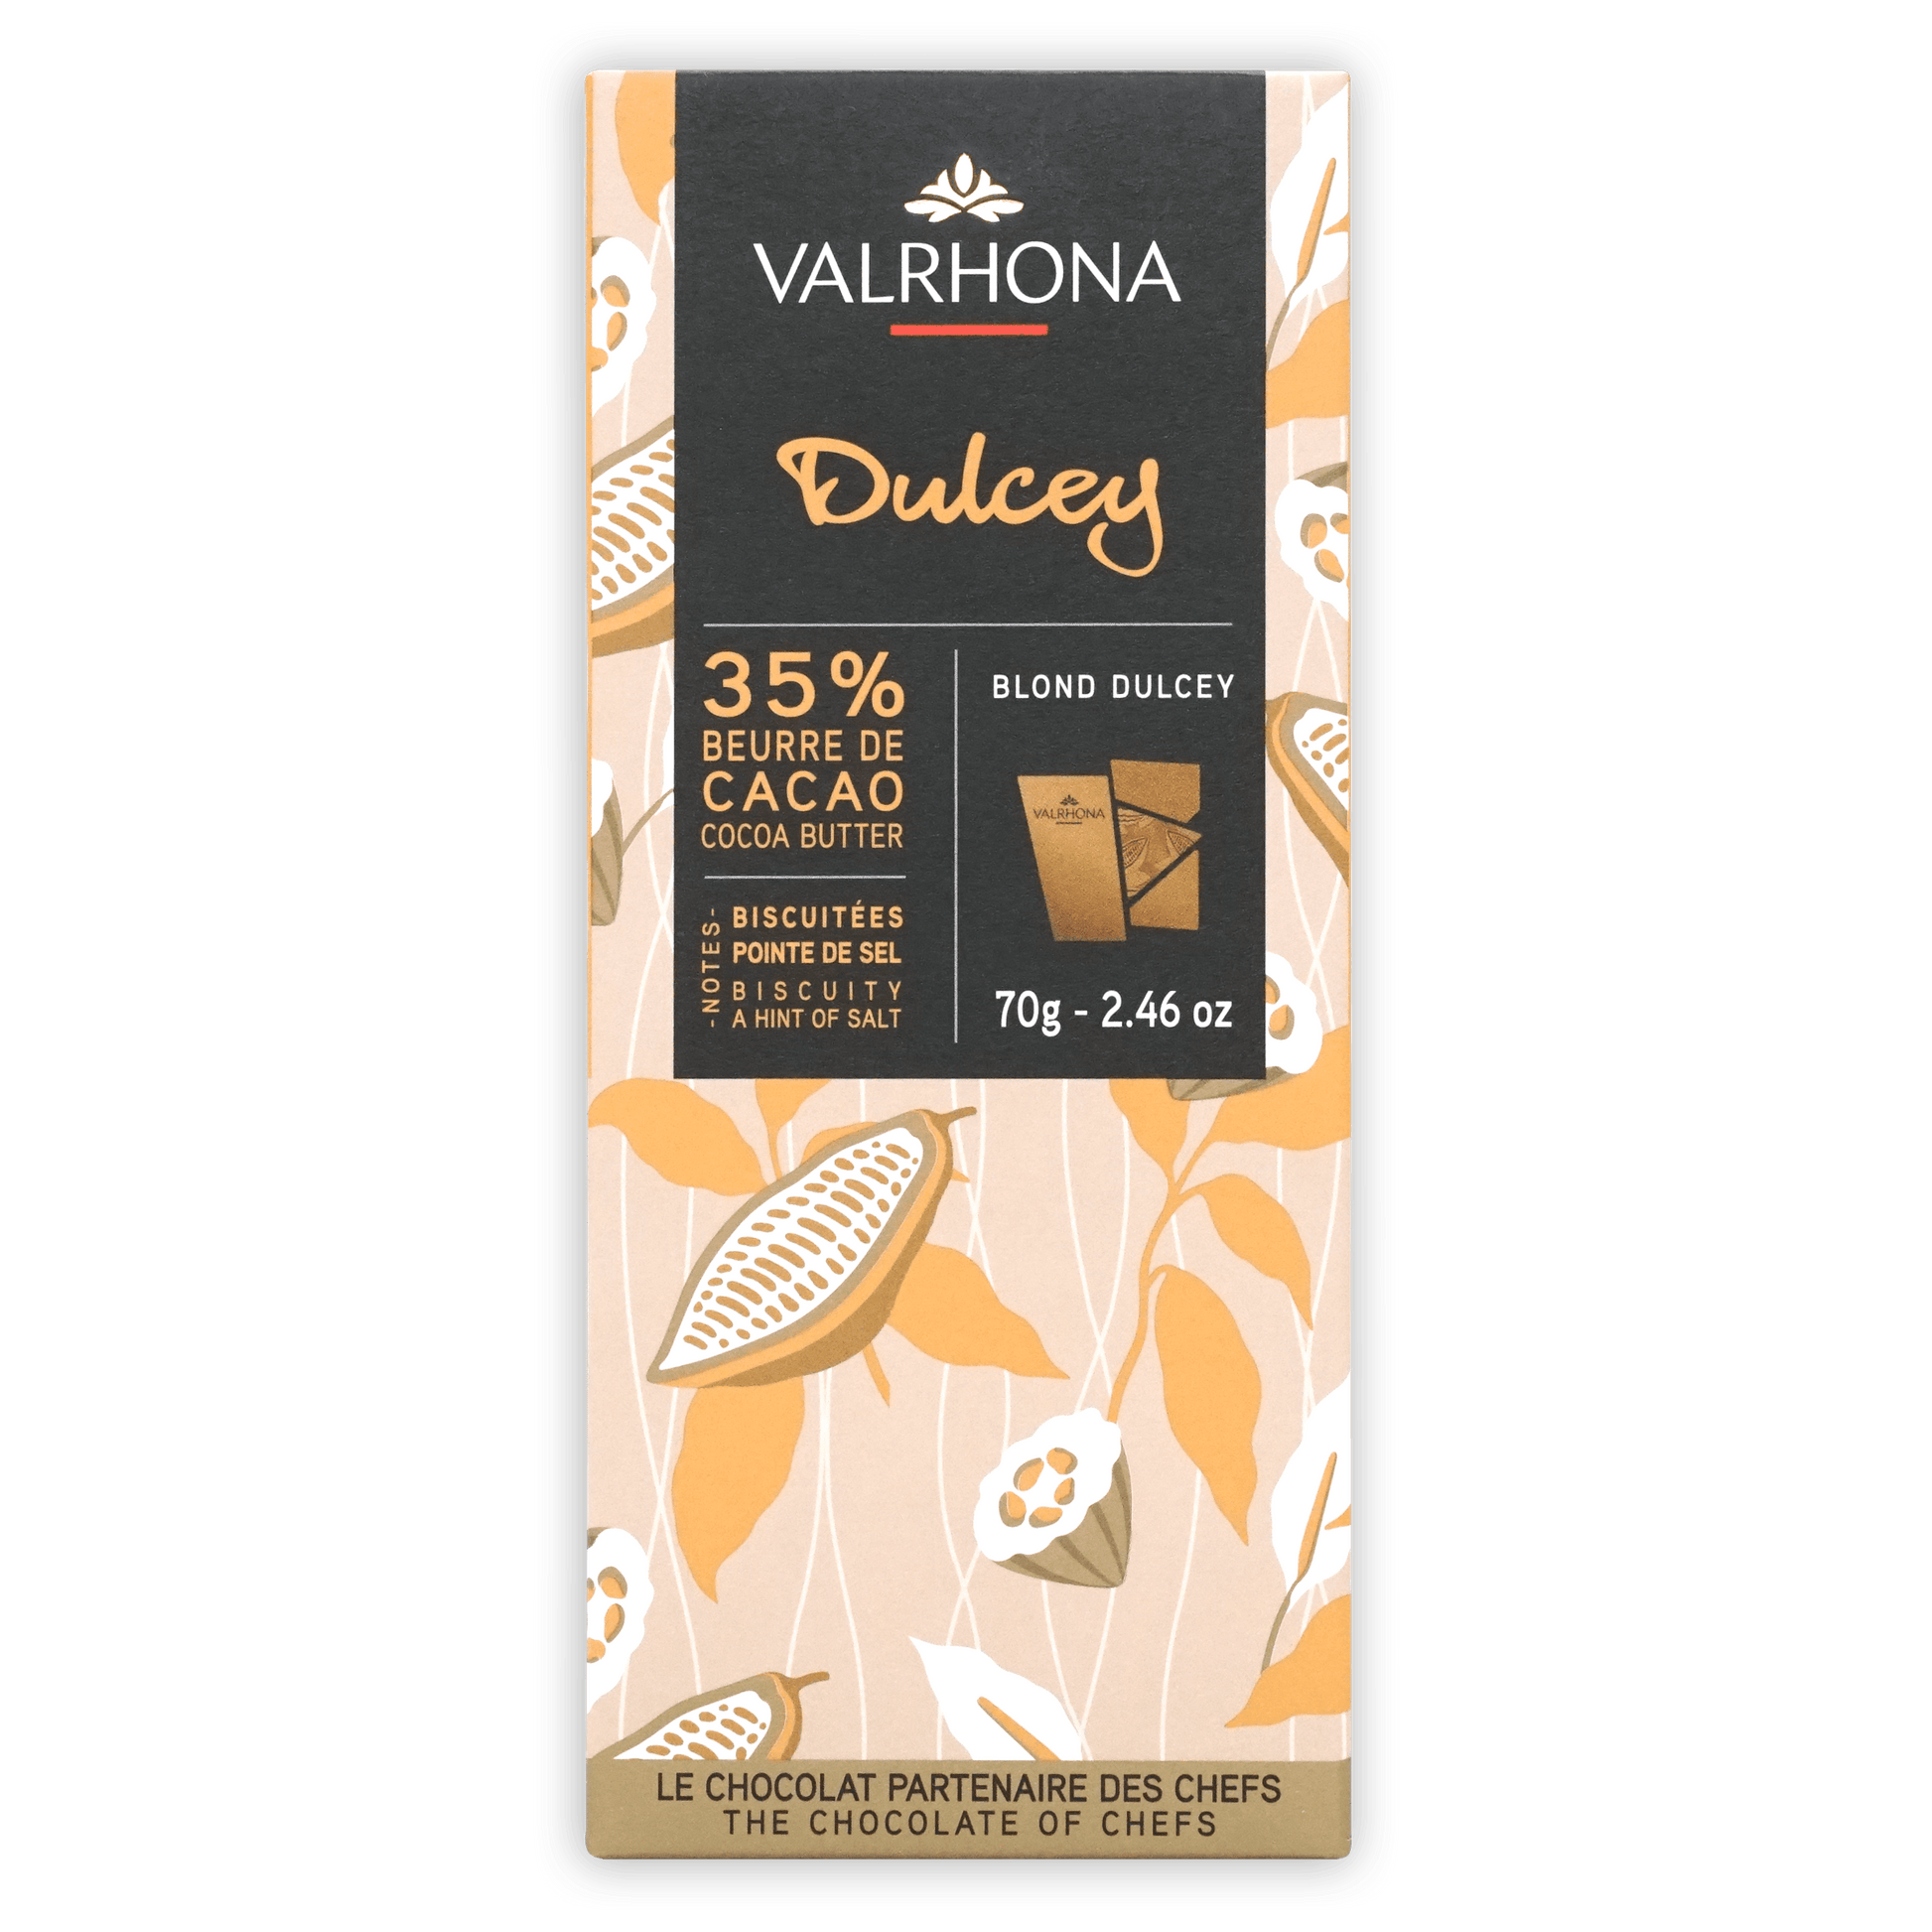 Valrhona Dulcey Chocolate Review